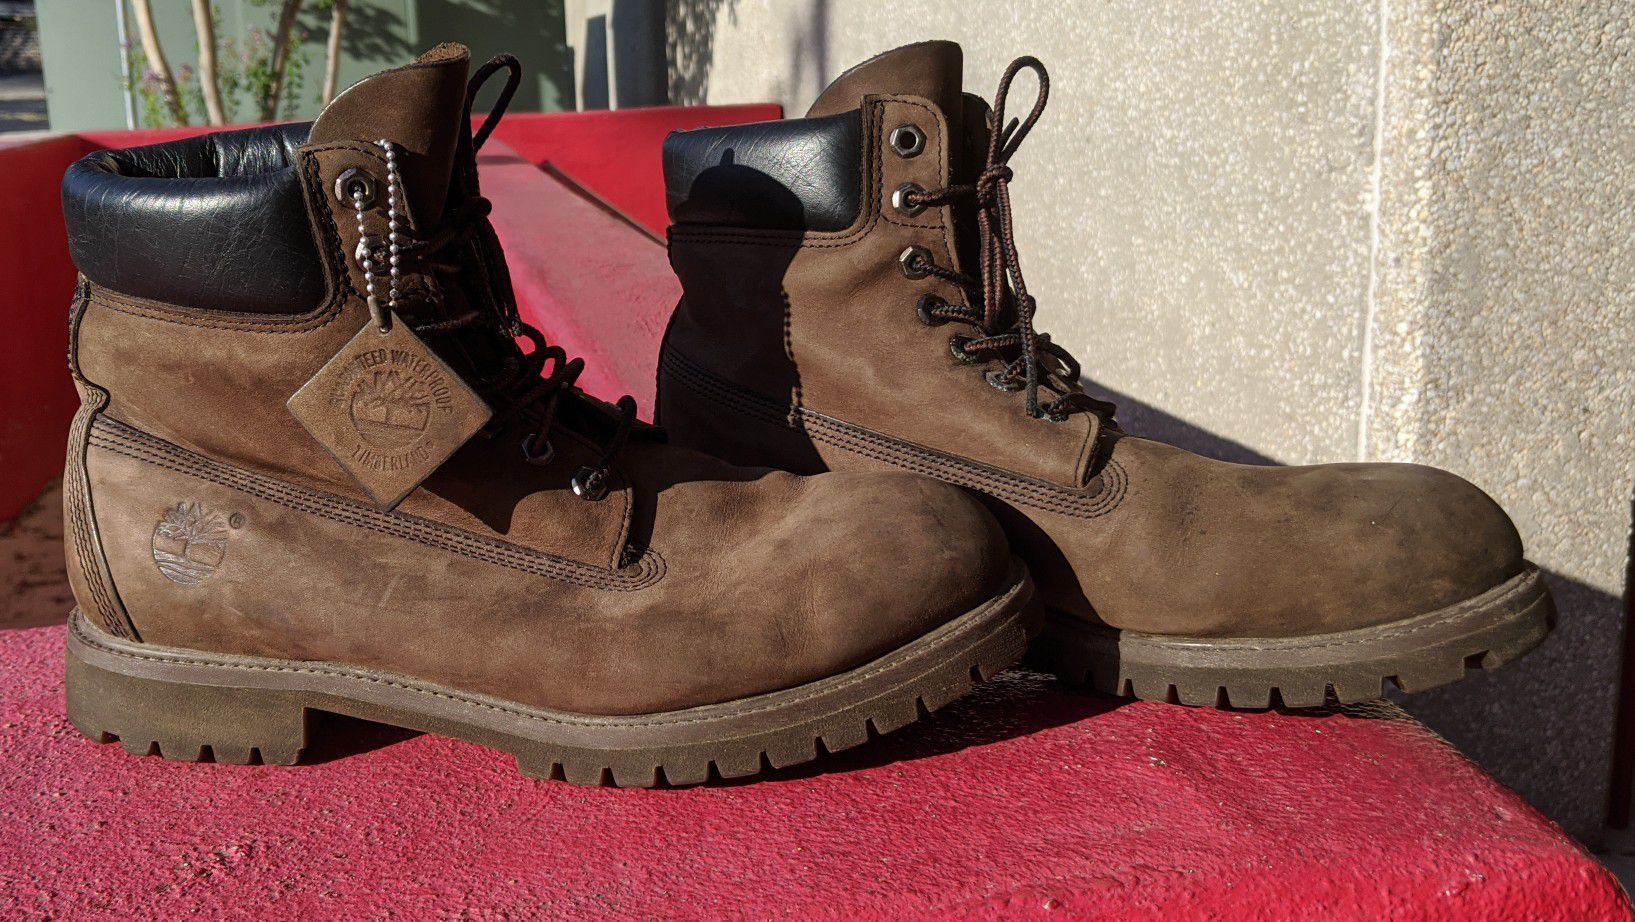 10.5 M. Vintage Retro TIMBERLAND classic brown leather Work hiking Boots. Tag attached.